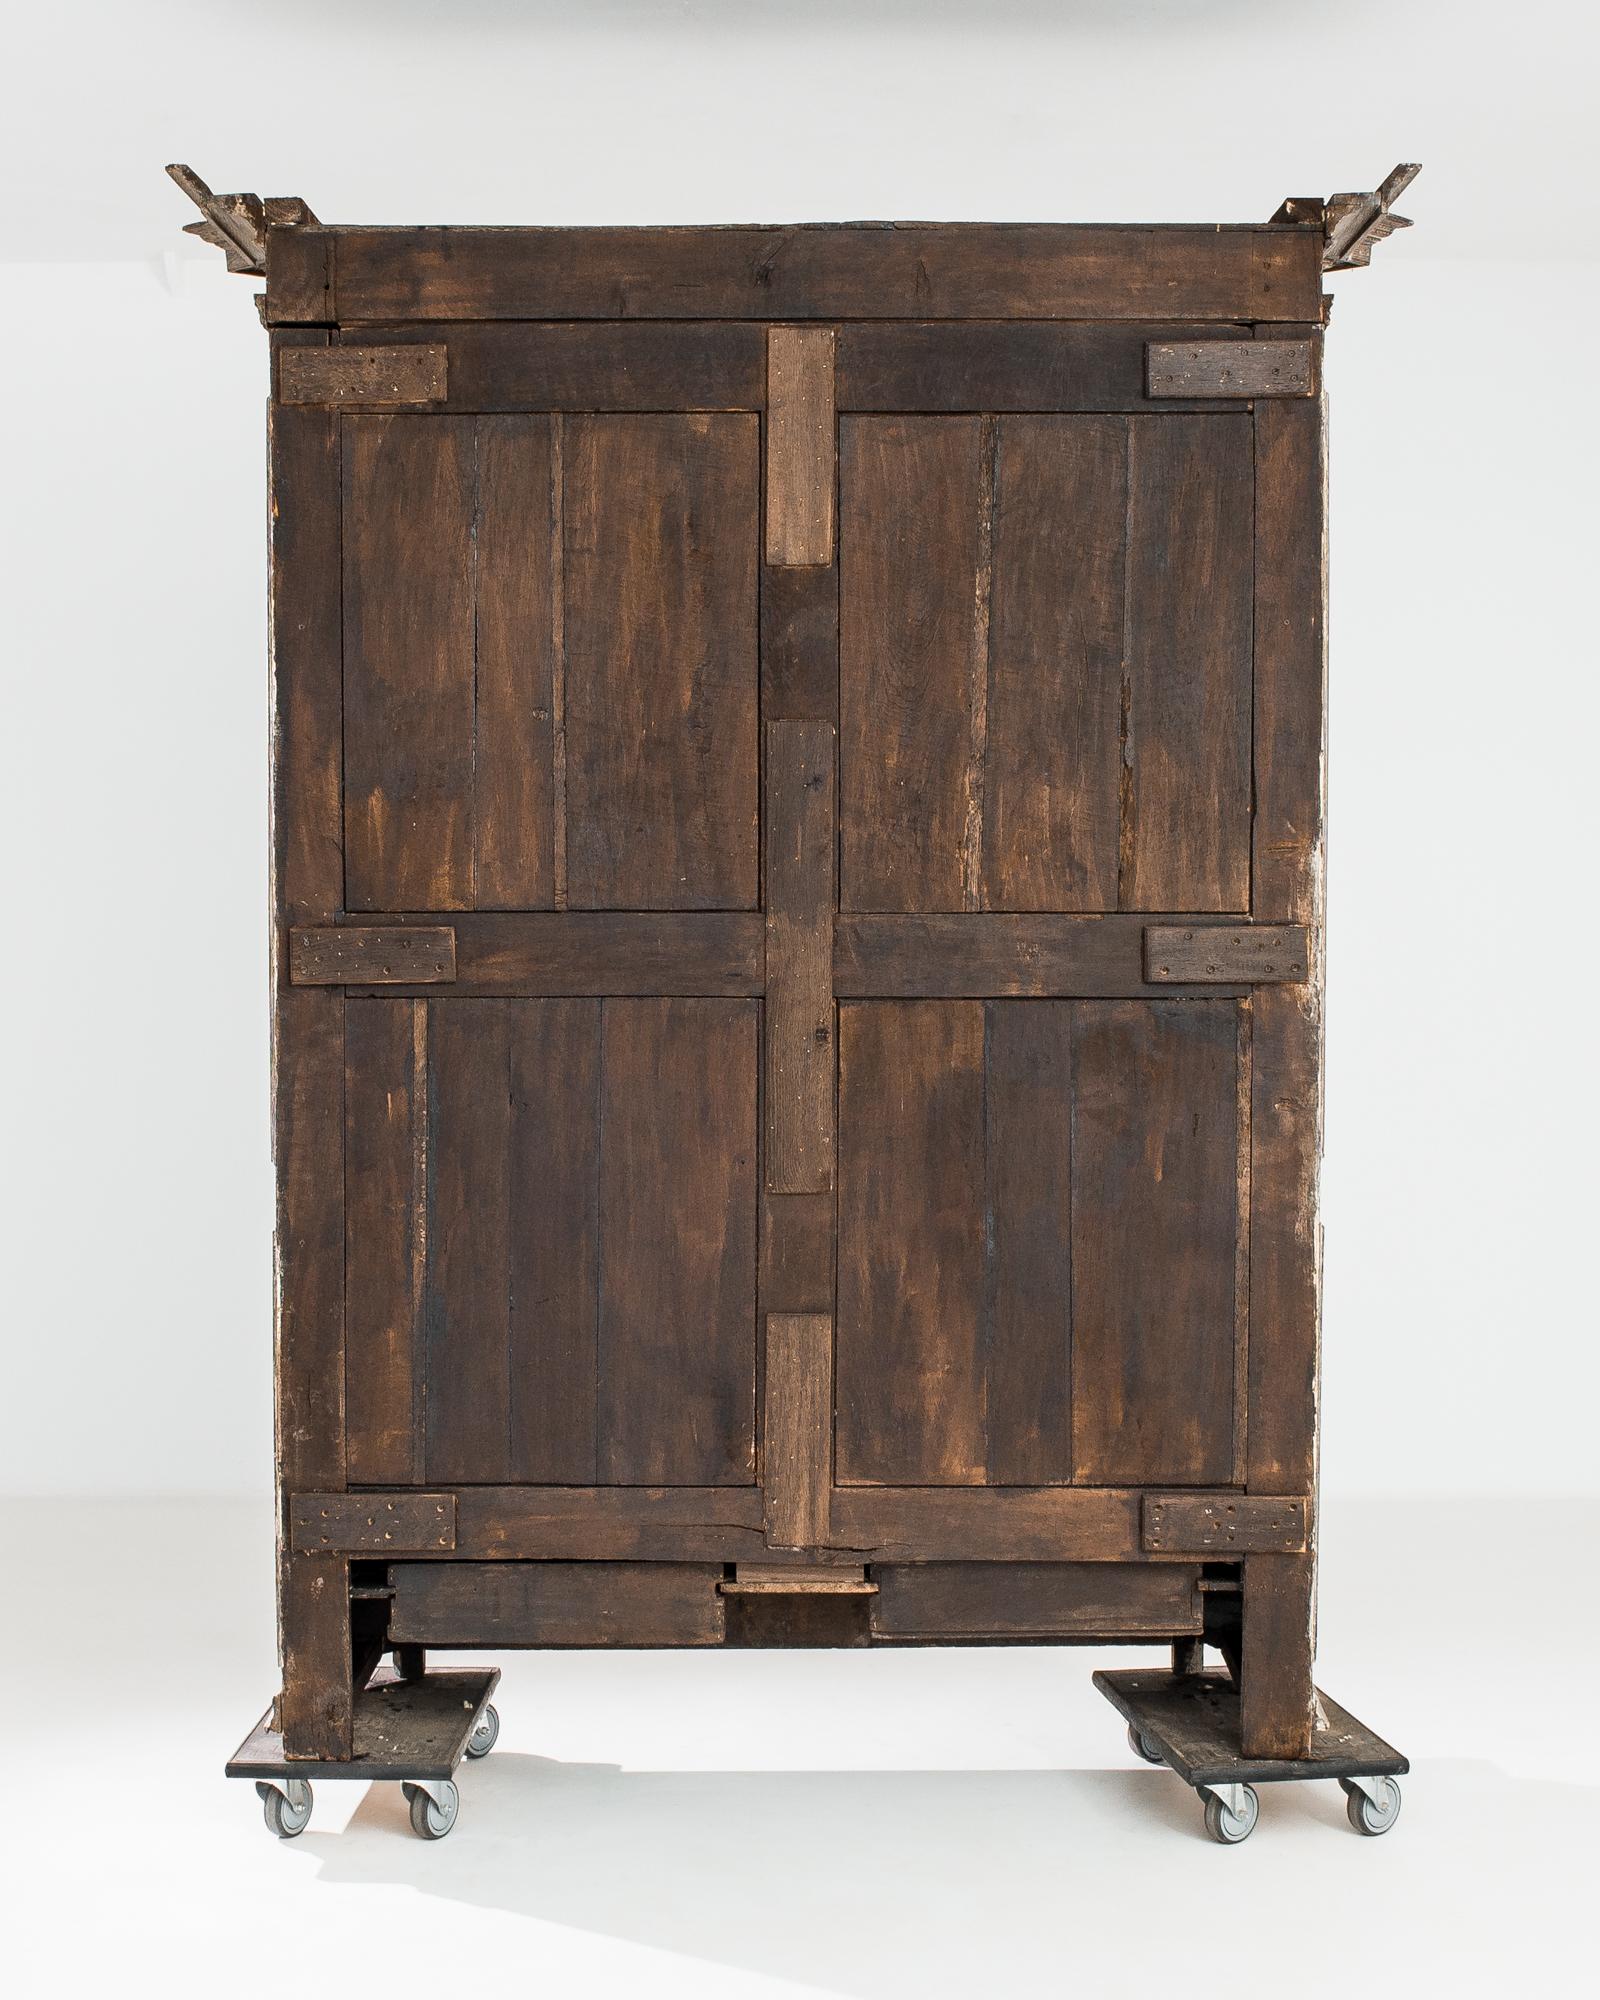 This French oak armoire, made circa 1860, imparts the distinguished air of classical antiquity. The cabinet adopts an upright shape accentuated by the mitered corners of the molded cornice. Simple elegant outlines of the carvings on the raised doors